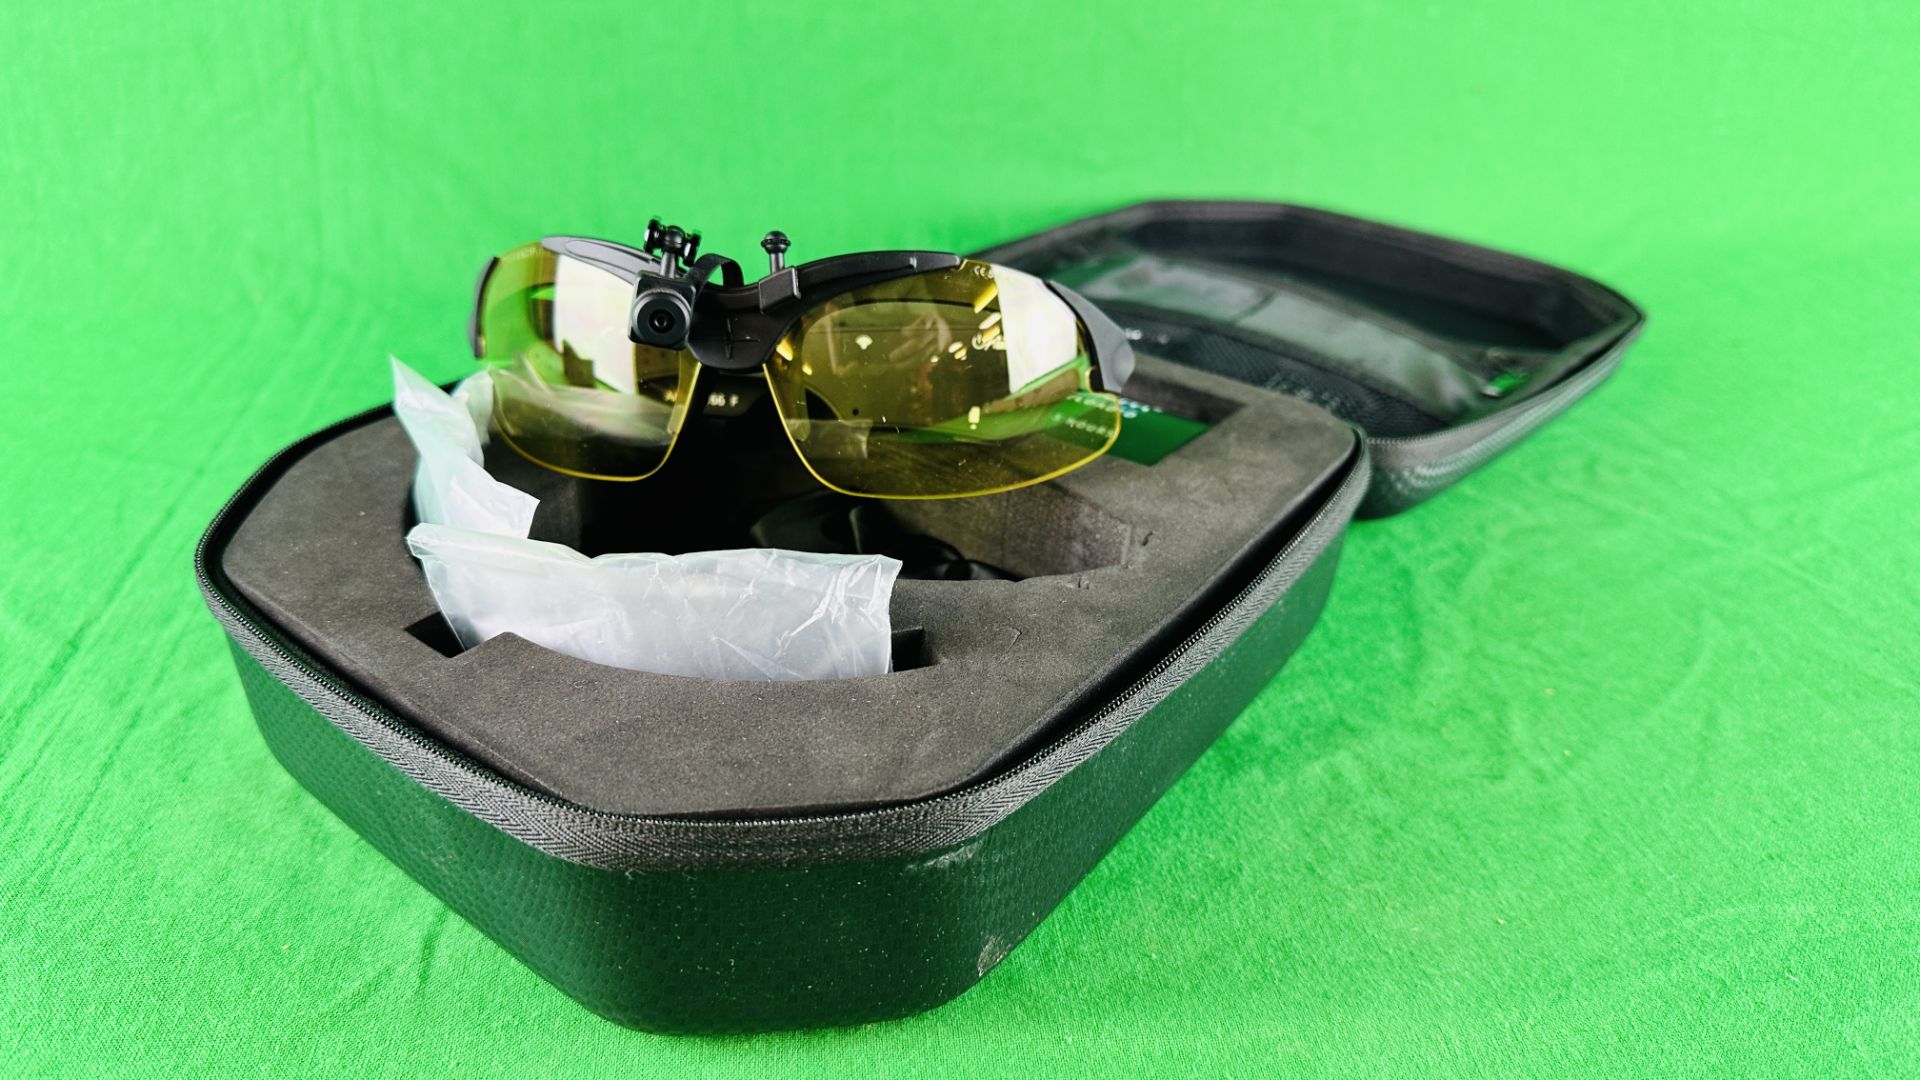 AIMCAM PRO 2 GLASSES COMPLETE WITH AIMCAM RELOADED BATTERY,